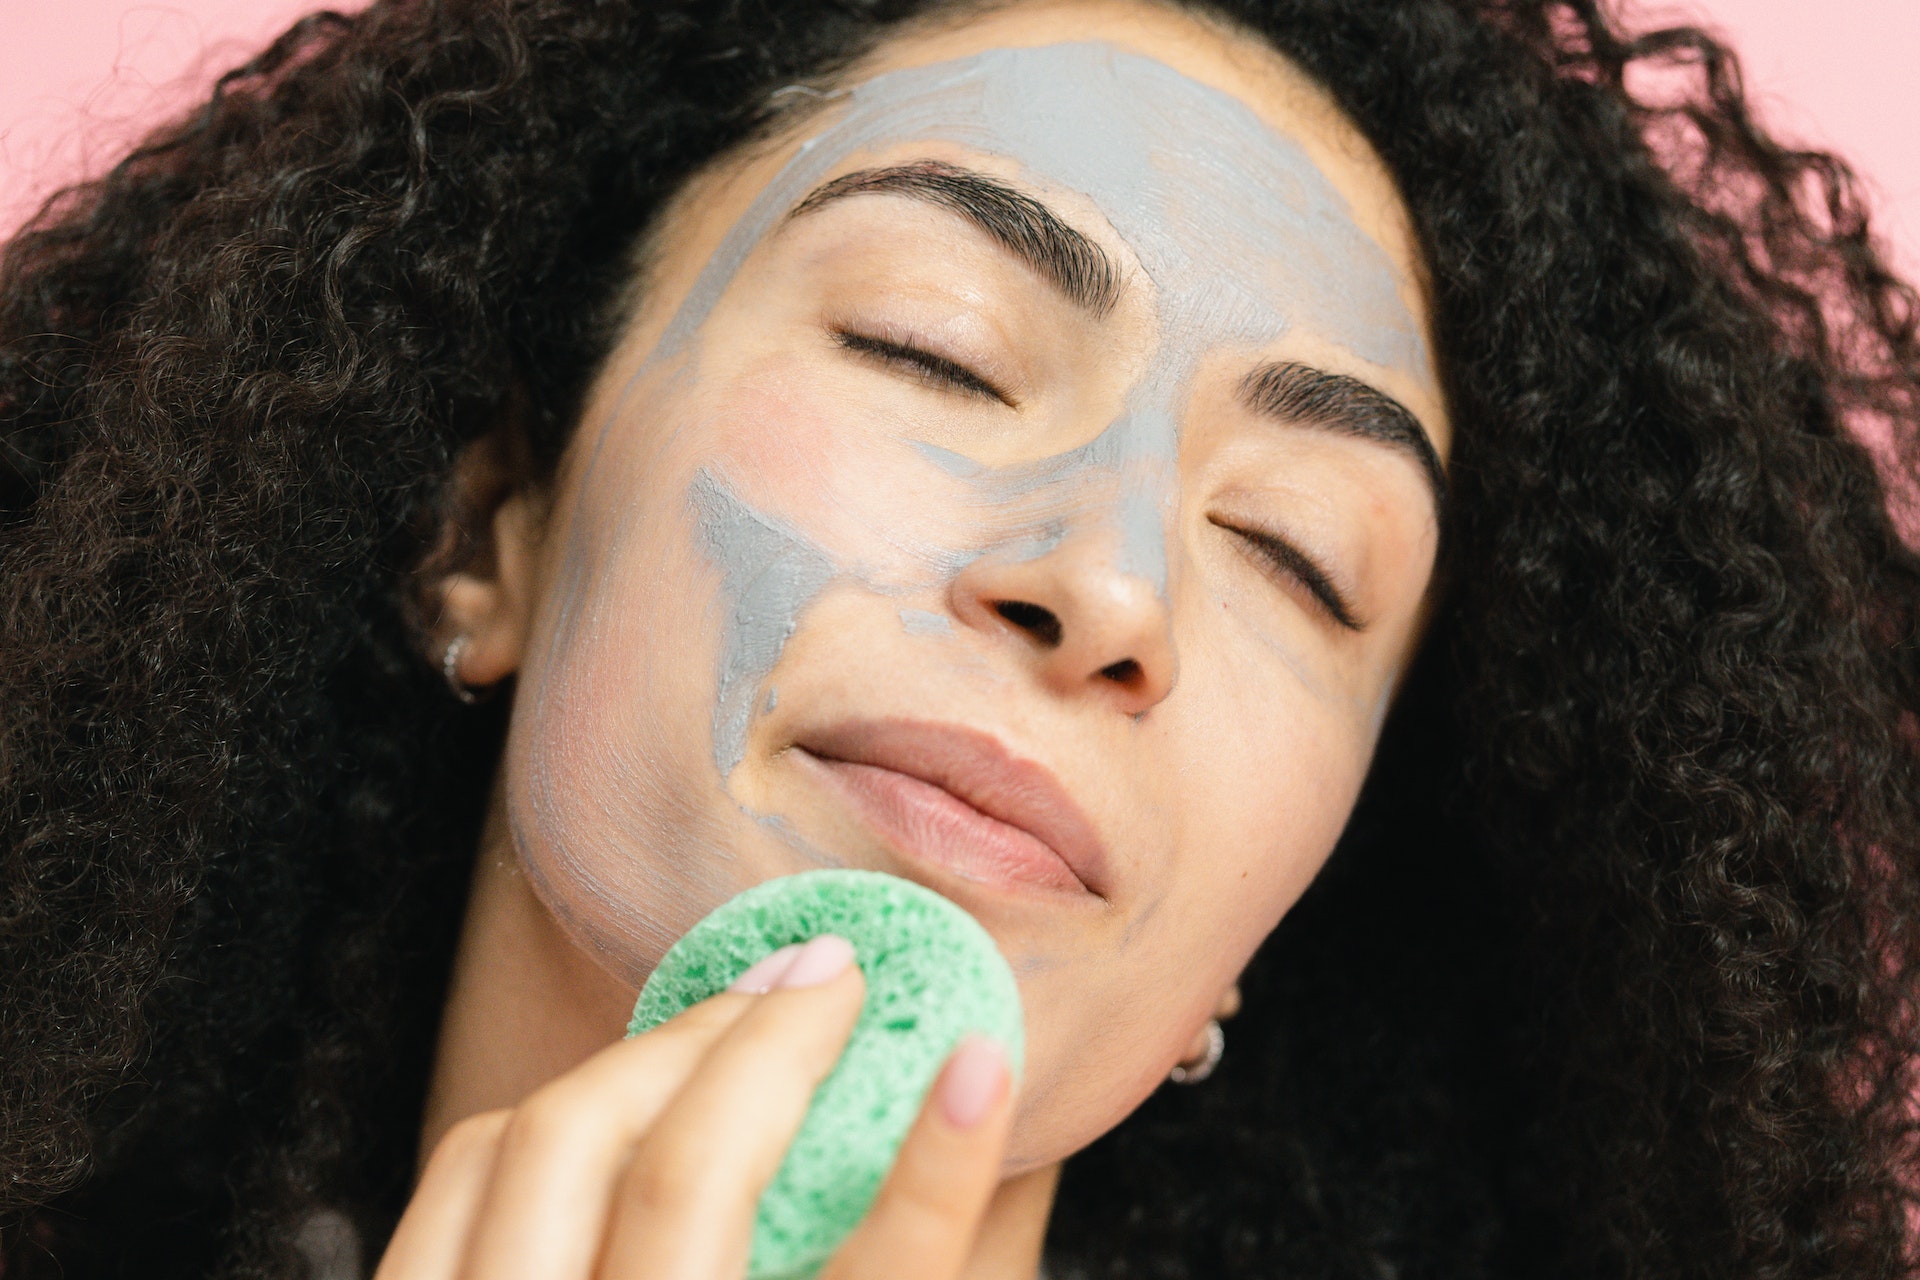 How To Use An Exfoliating Sponge For The Face?